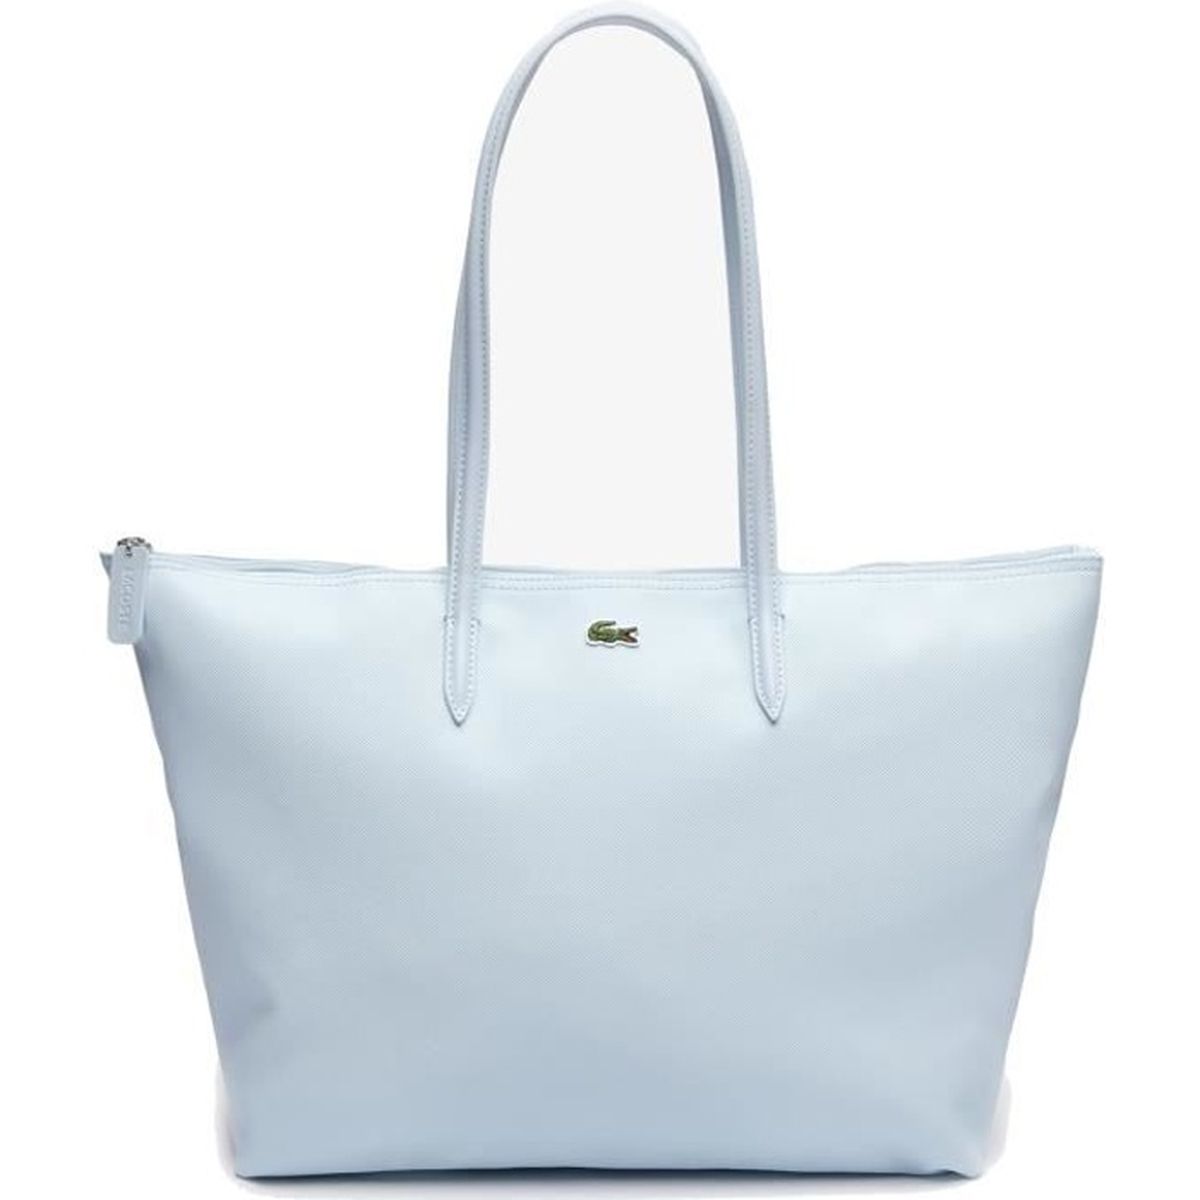 Shopping > sac a main lacoste cdiscount, Up to 64% OFF